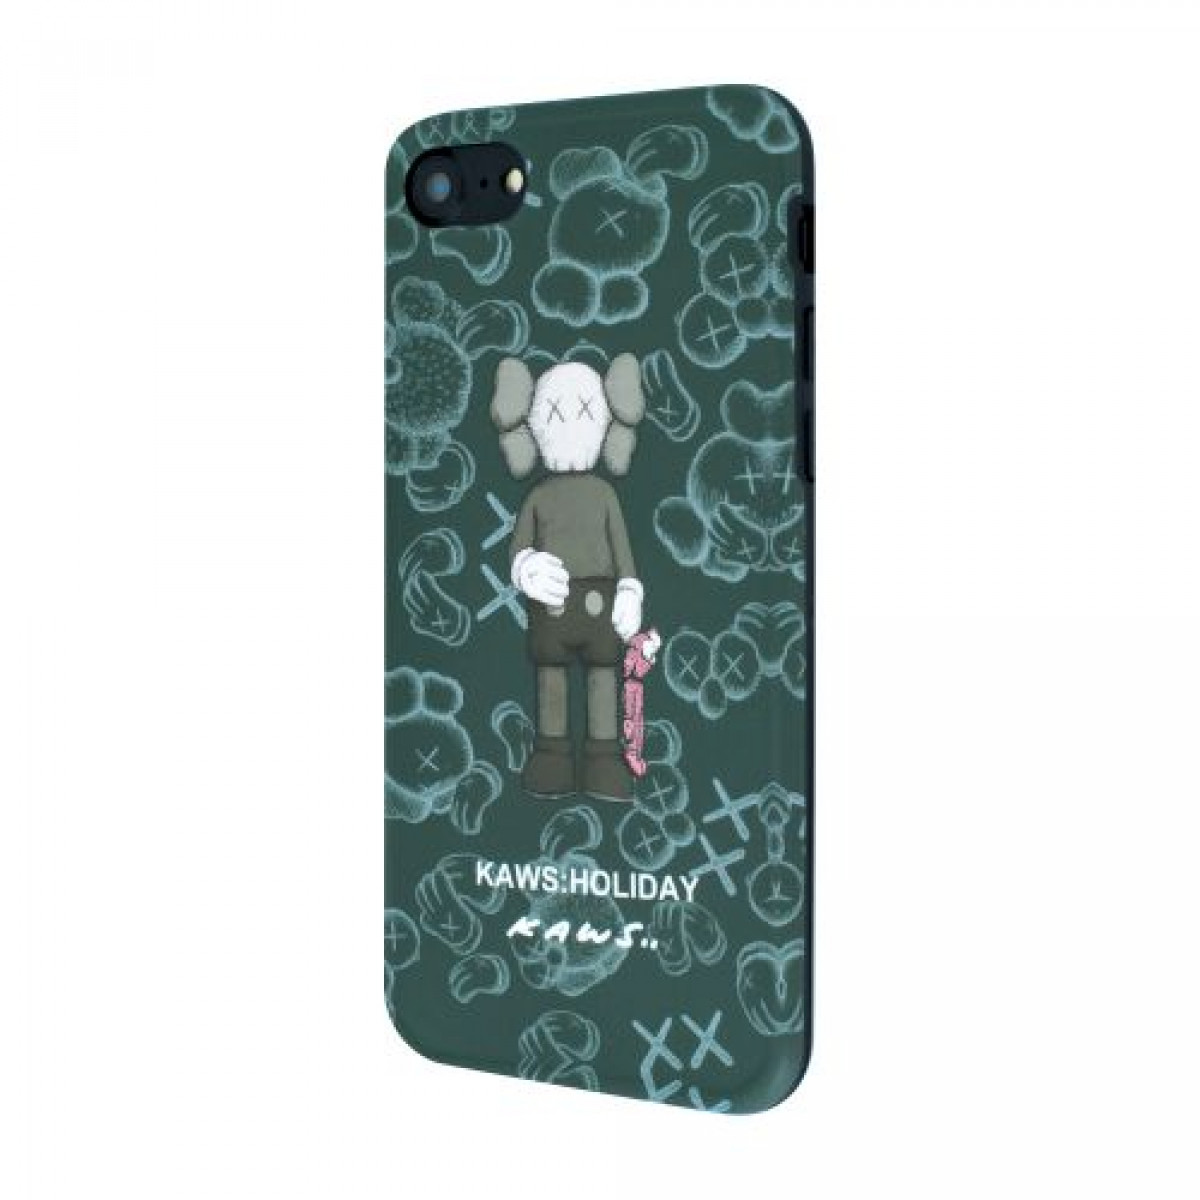 IMD Print Kaws Holiday Case for iPhone 7/8/SE